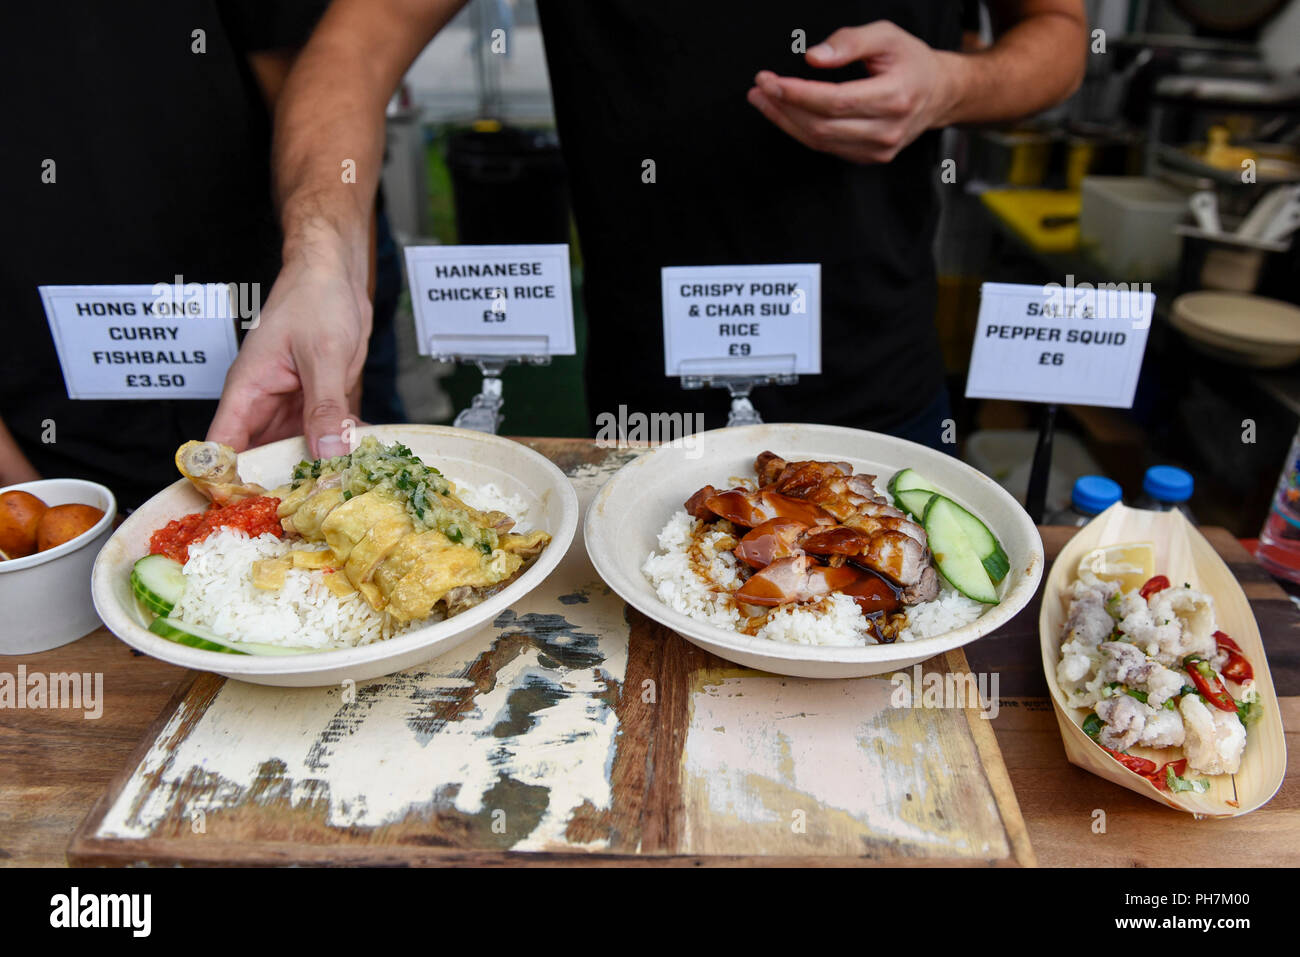 London, UK.  31 August 2018. Dishes are prepared on the opening day of the three day Chinese Food Festival at Potters Fields Park next to City Hall.  As well as food and drink from different parts of China freshly prepared for visitors to try, there are cooking demonstrations and presentations by the UK Han Culture Association.  Credit: Stephen Chung / Alamy Live News Stock Photo